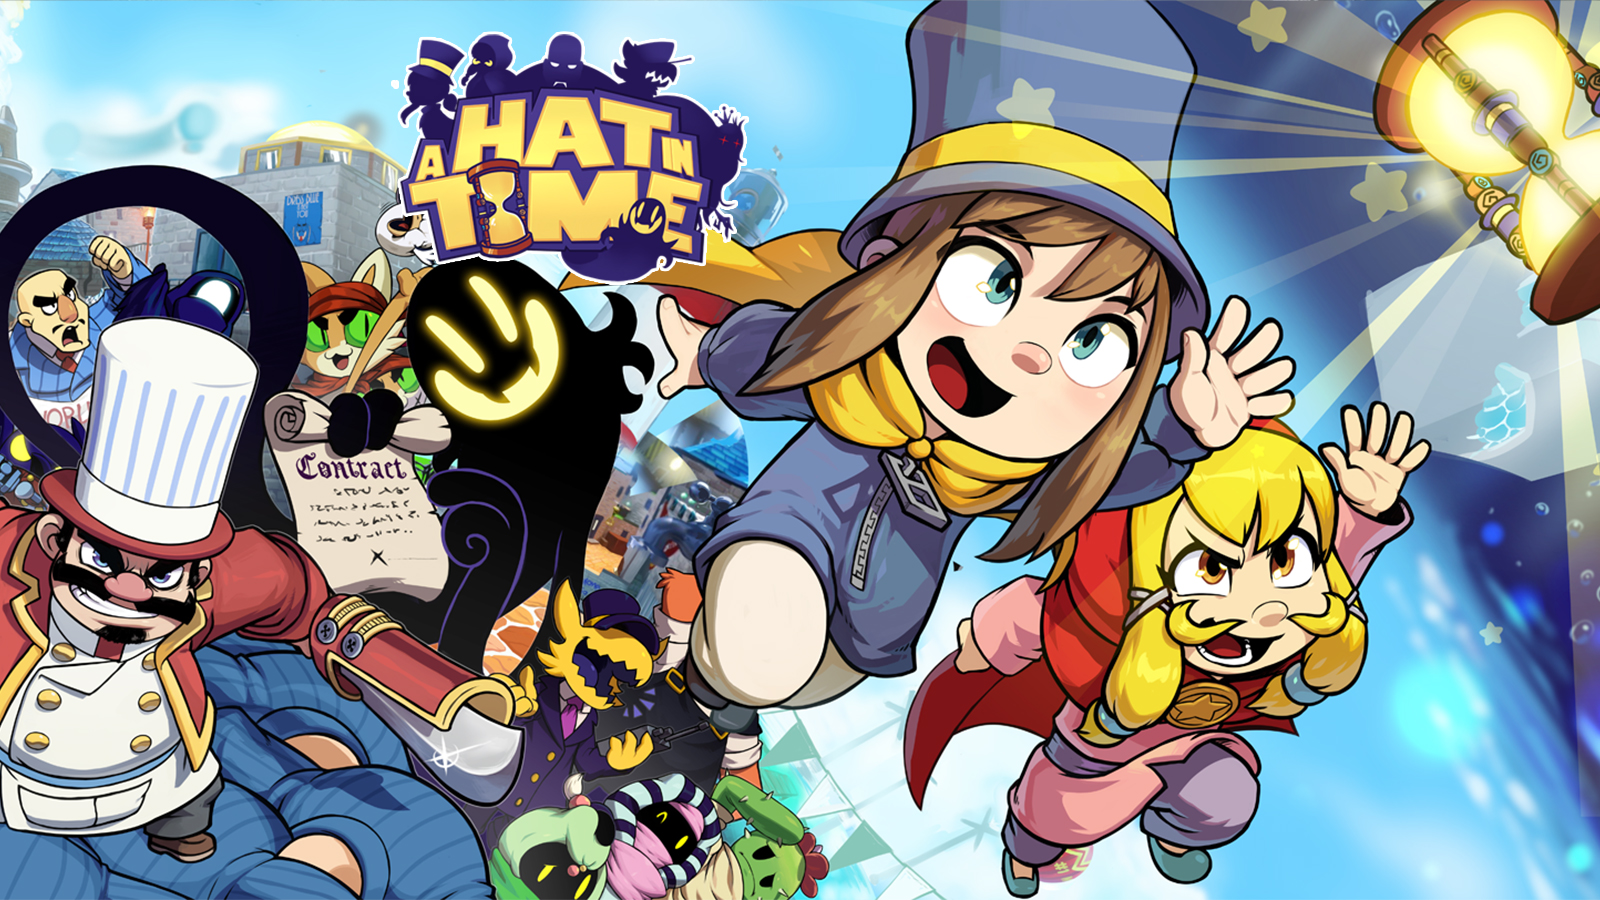 A Hat in Time - Metacritic